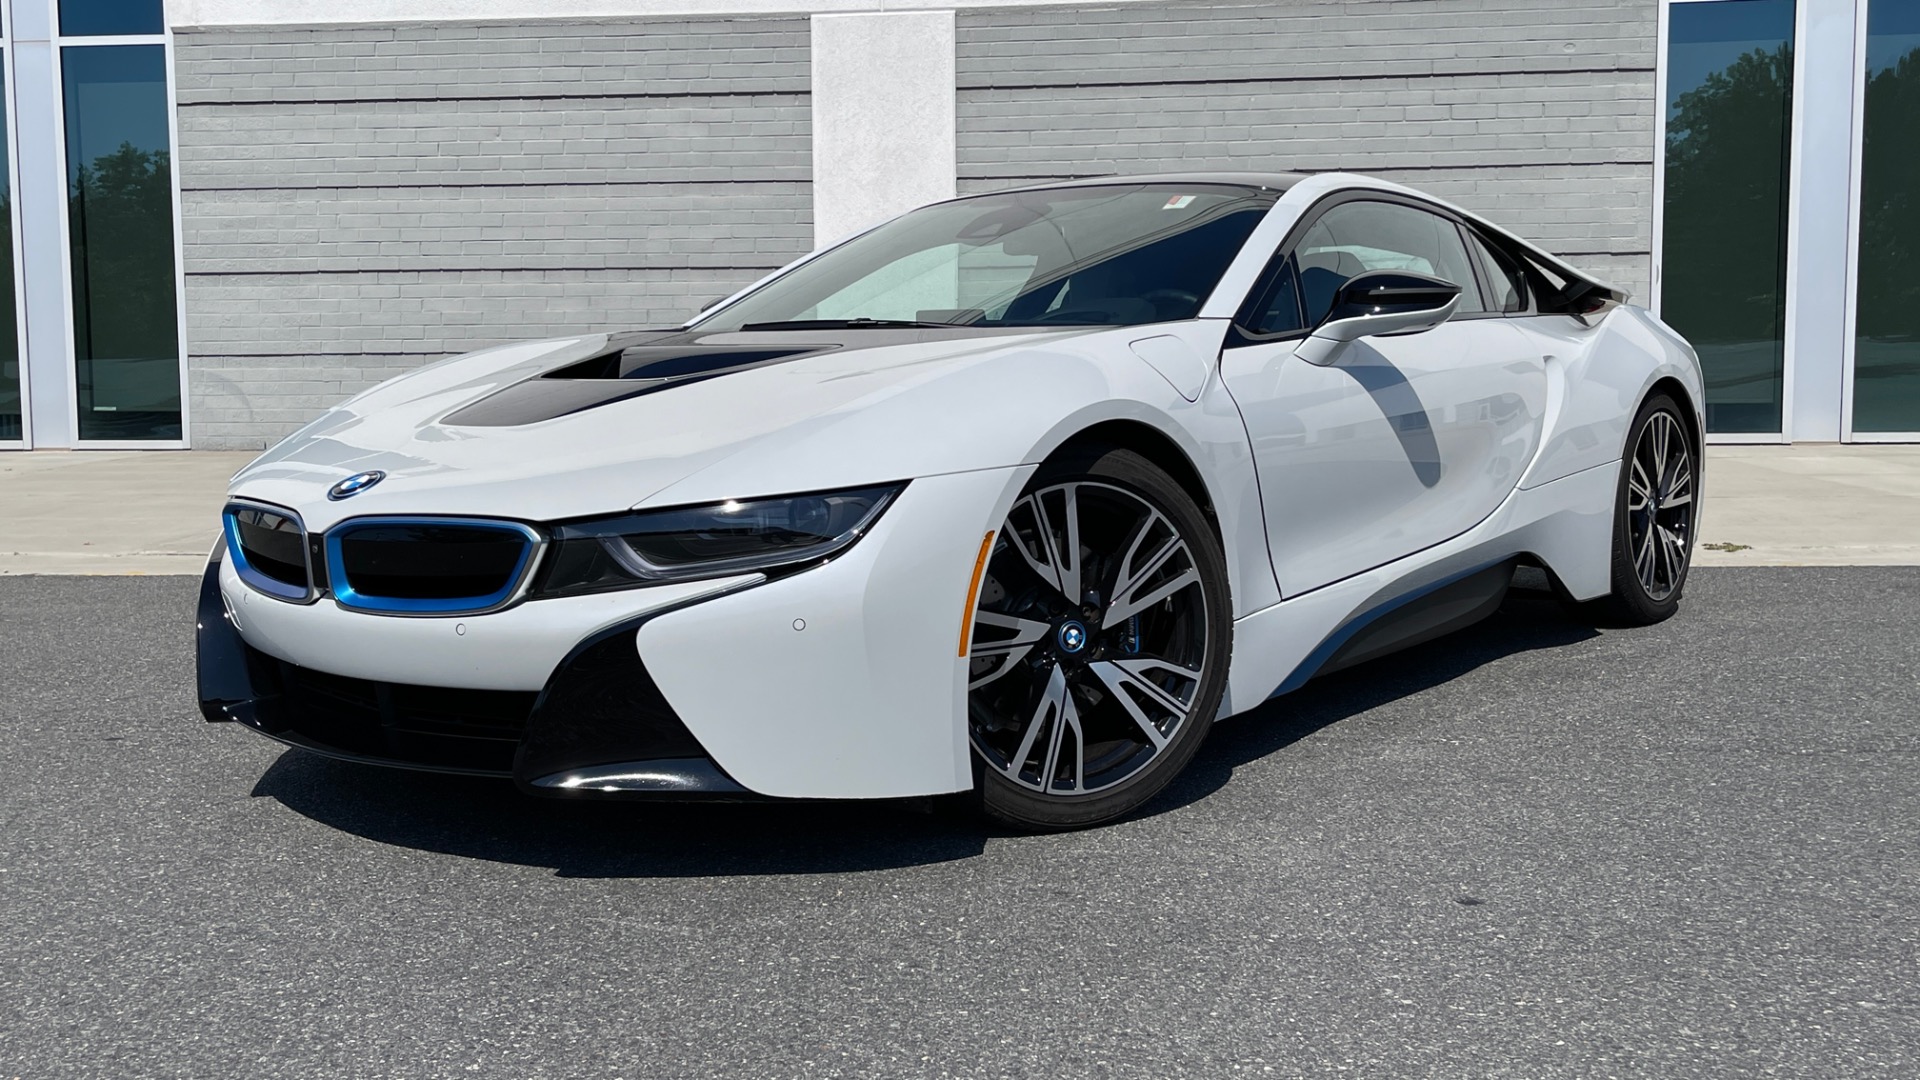 Used 2014 BMW i8 PURE IMPULSE WORLD / BLUE SEATBELTS / PERFORATED LEATHER / LED HEADLIGHTS for sale $75,999 at Formula Imports in Charlotte NC 28227 1